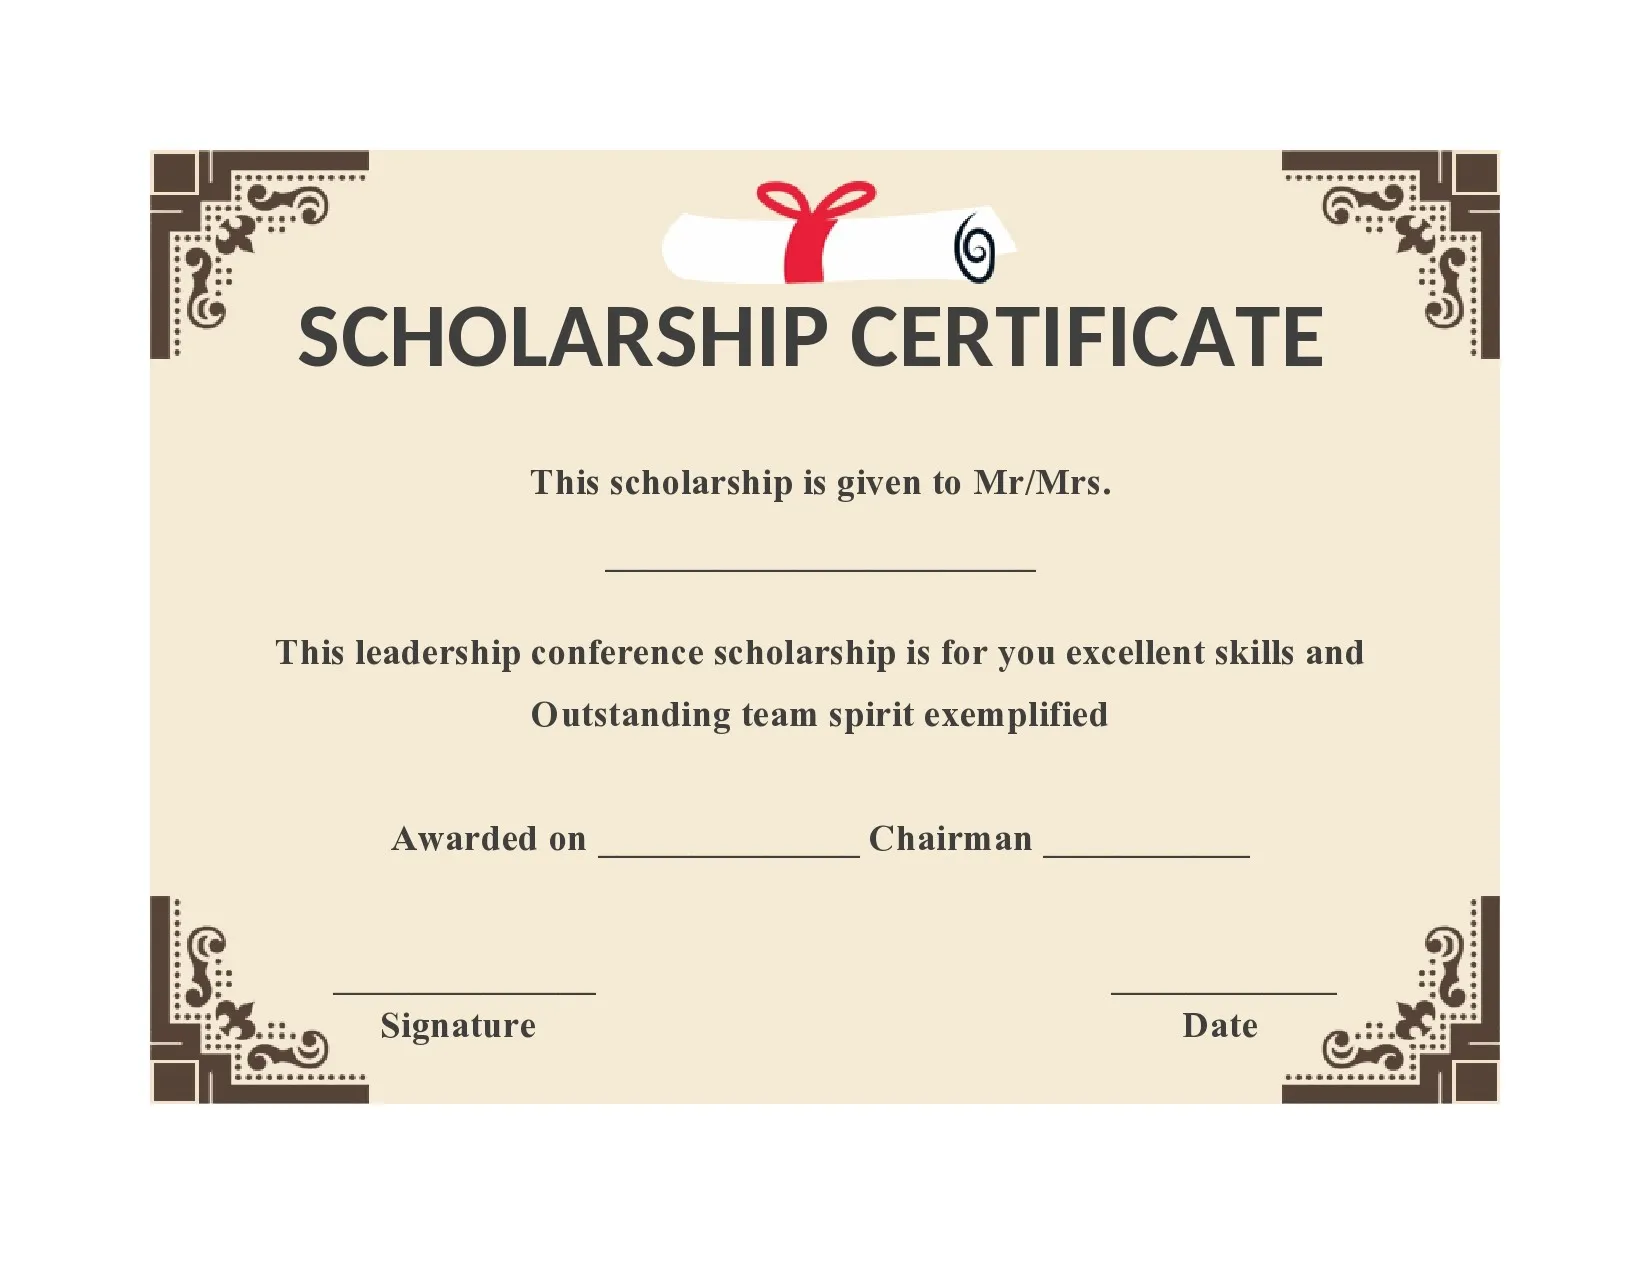 certificate of scholarship template, scholarship award certificate template, scholarship winner certificate template, memorial scholarship certificate template, church scholarship certificate templates, rotary scholarship certificate template, college scholarship certificate template, scholarship certificate template editable